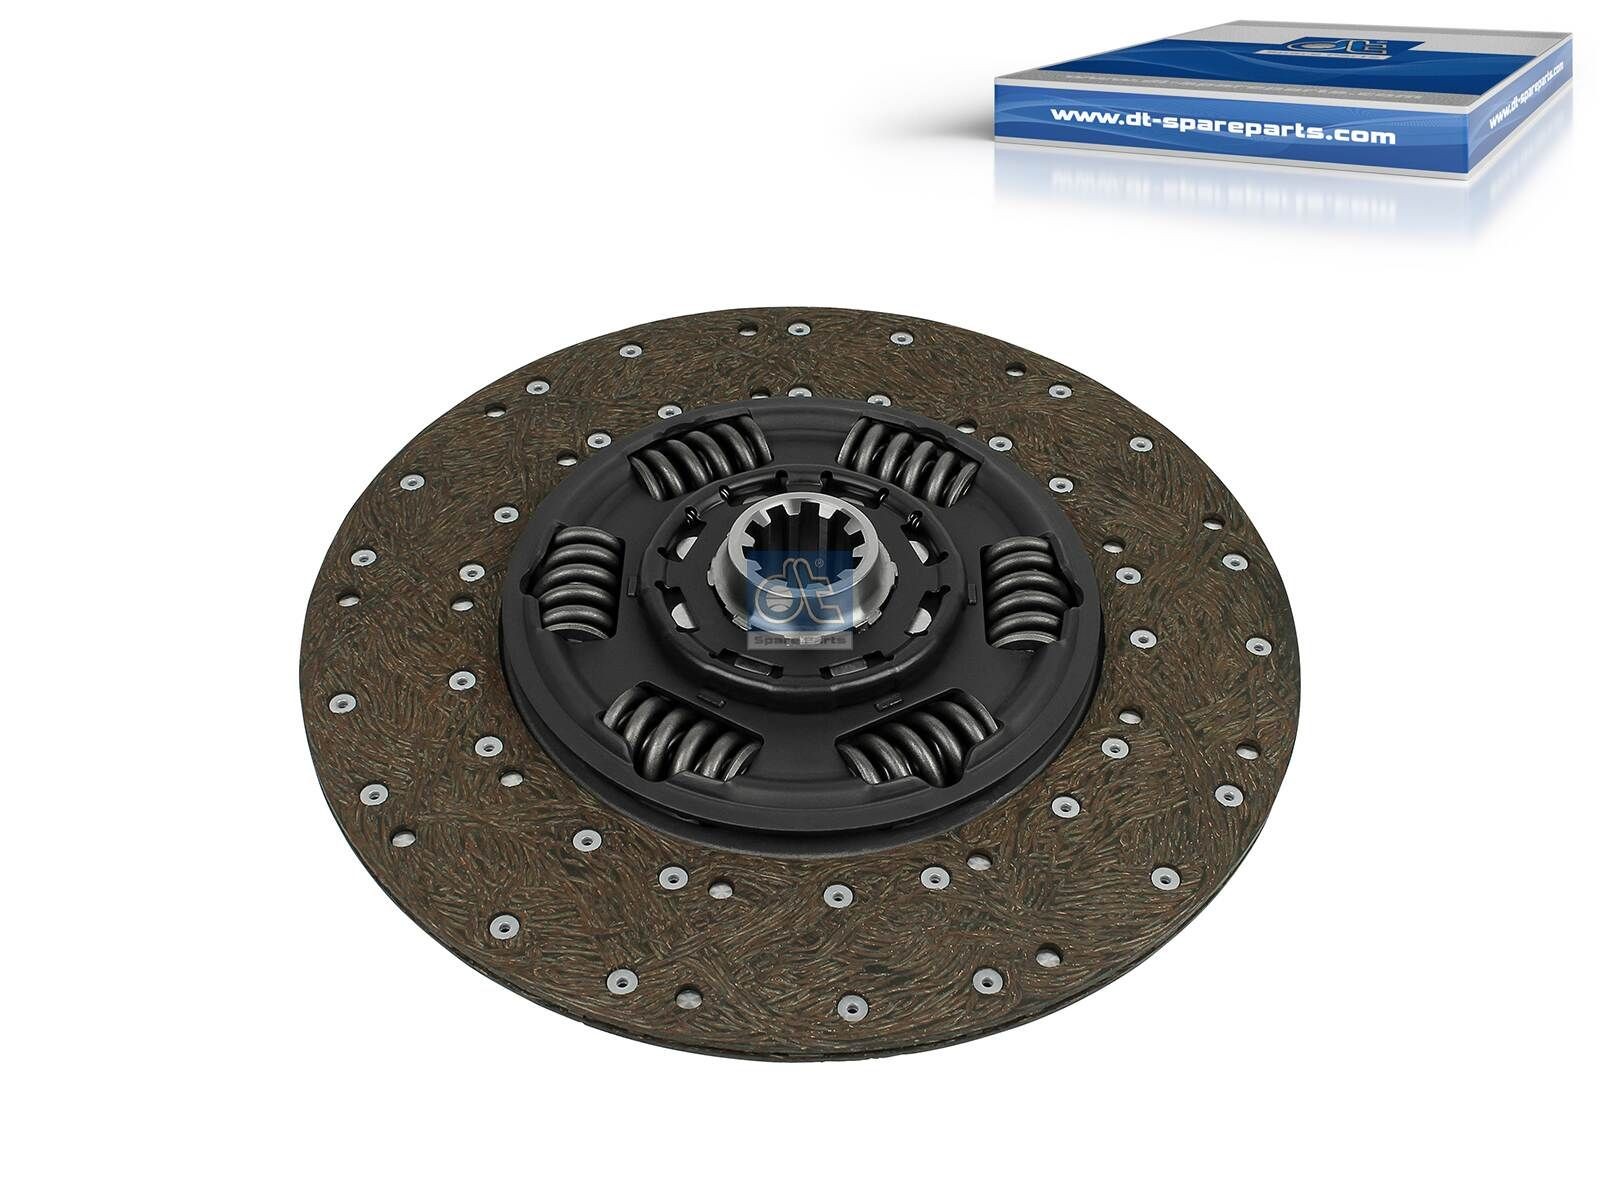 1878 002 139 DT Spare Parts 430mm, Number of Teeth: 10 Clutch Plate 3.40026 buy